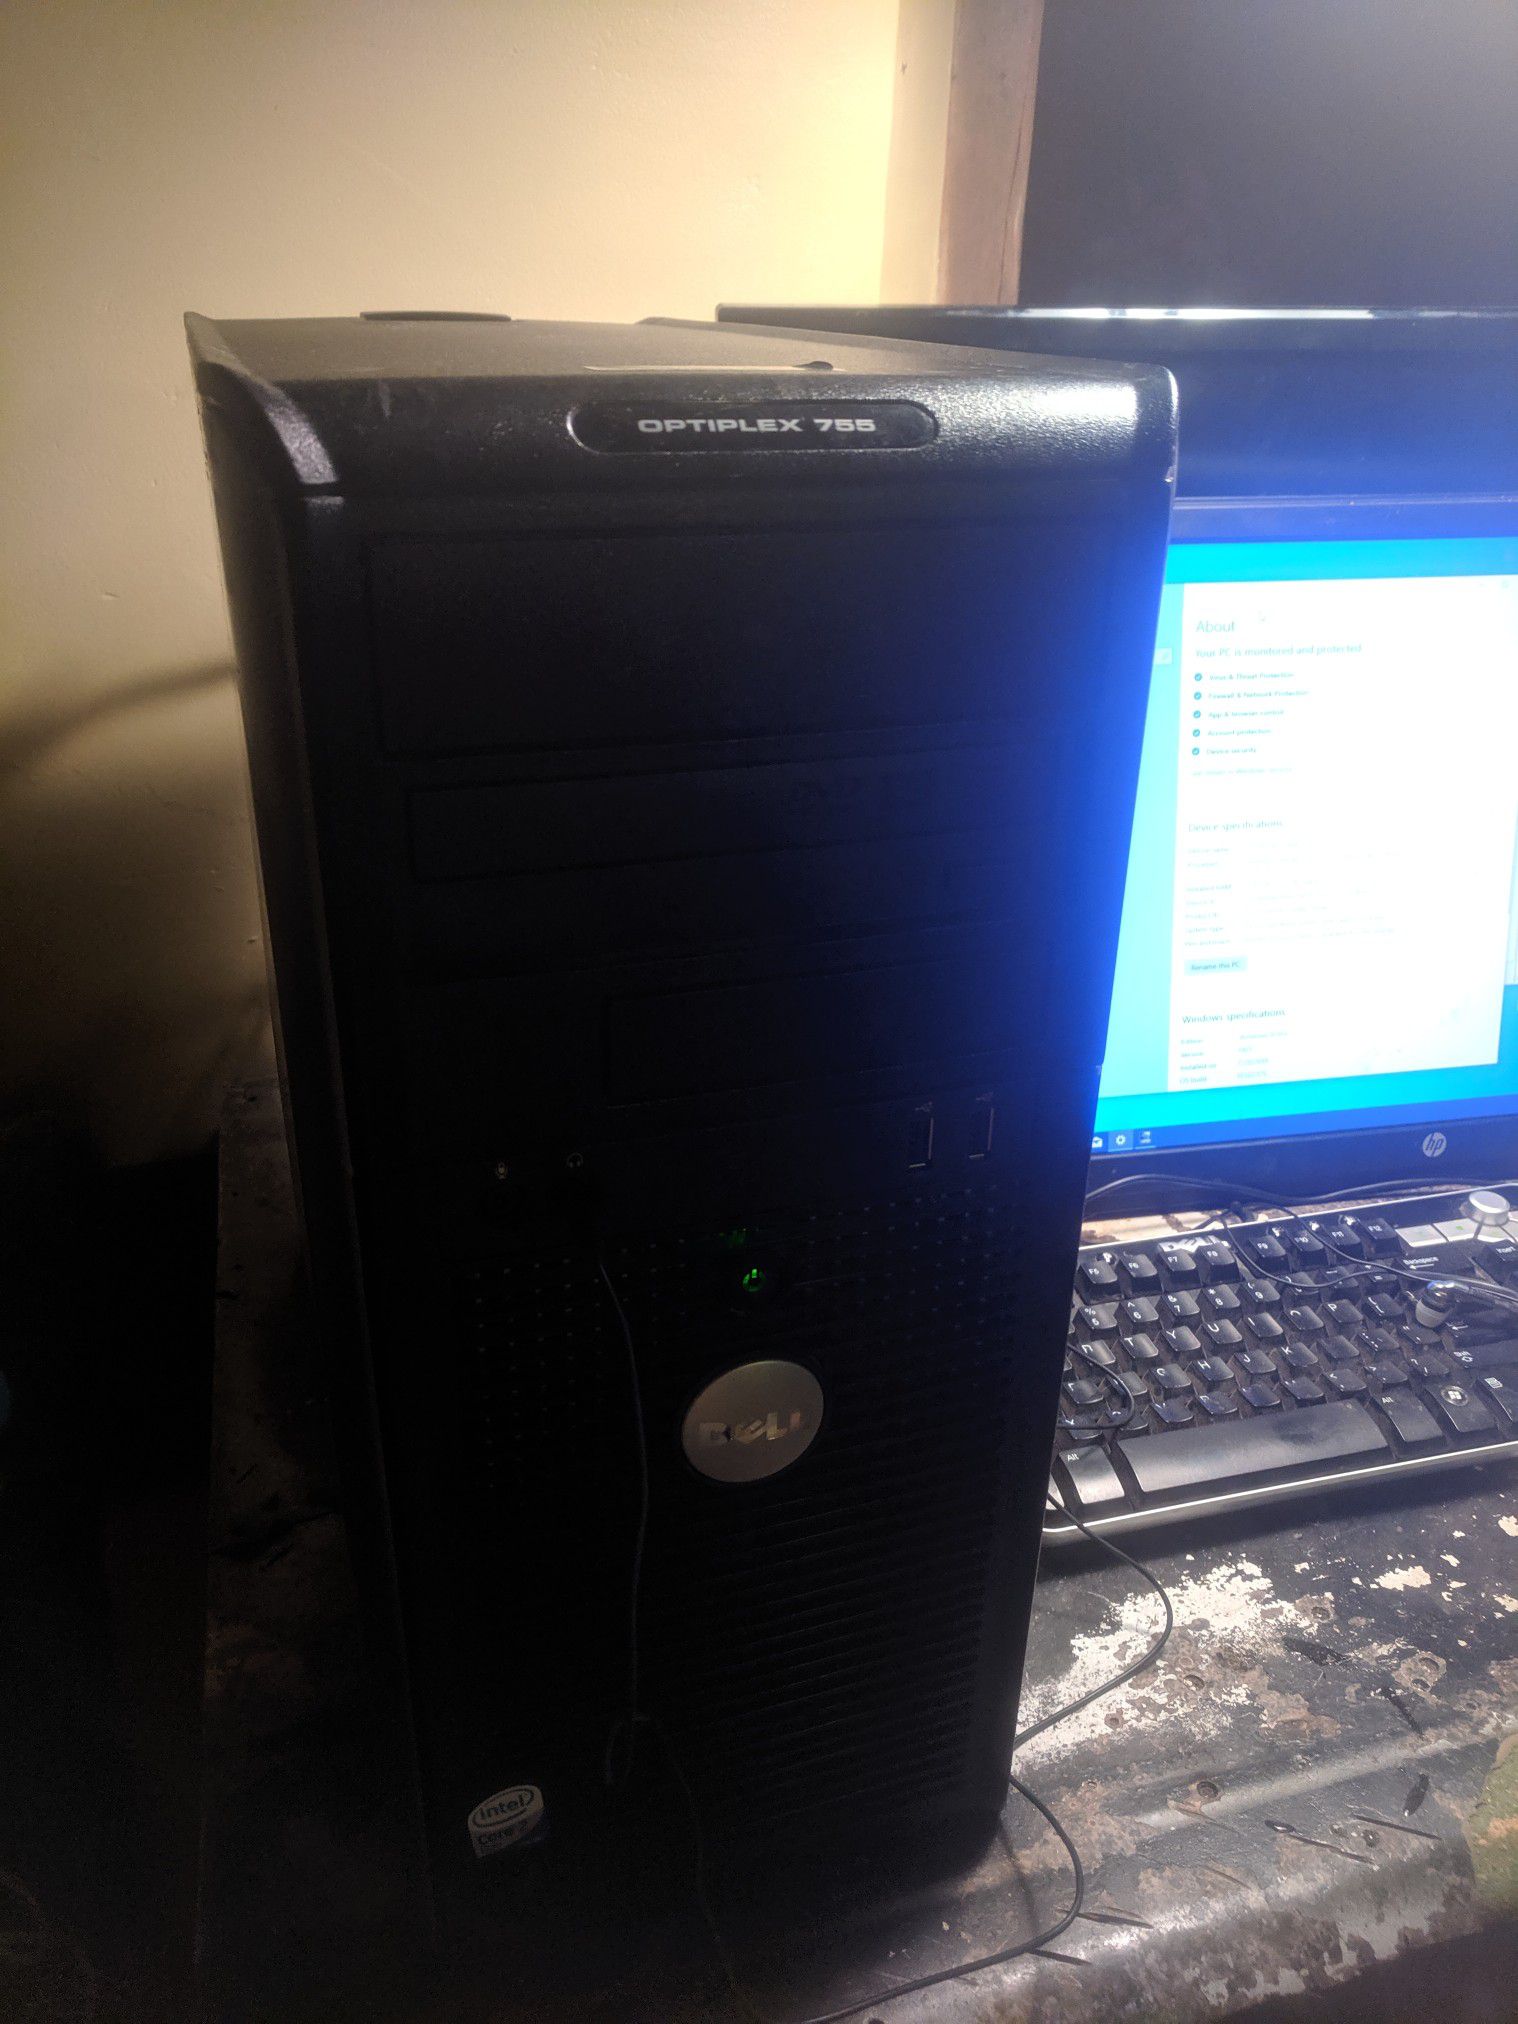 Gaming PC 8gb ram GTX 460 Special Edition 1gb graphics Win10 Pro